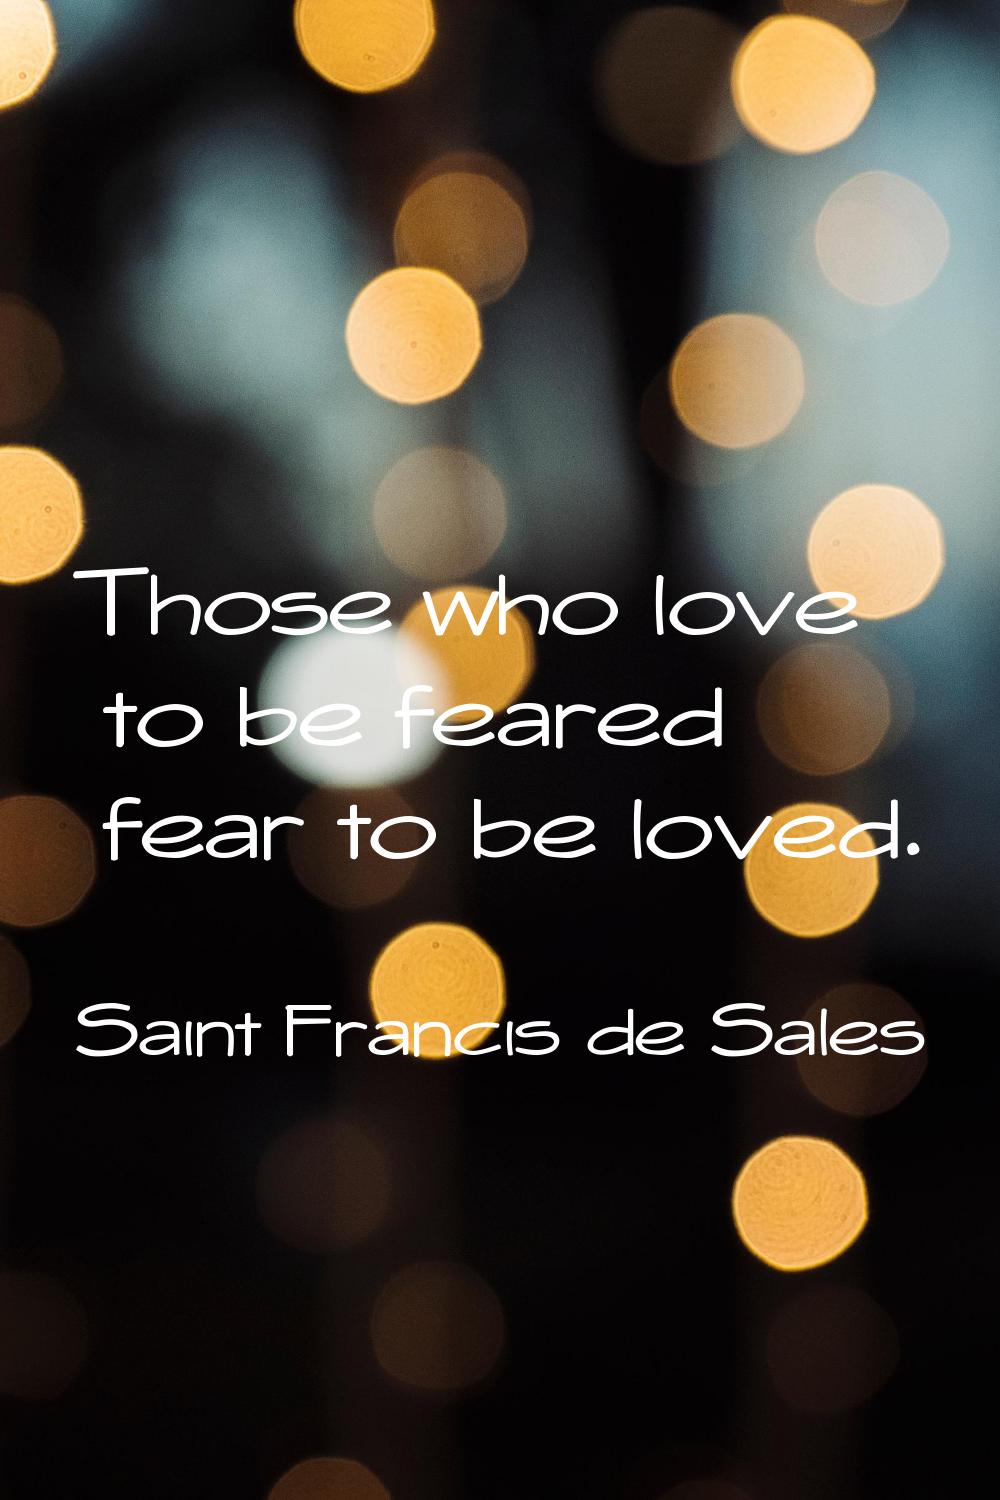 Those who love to be feared fear to be loved.